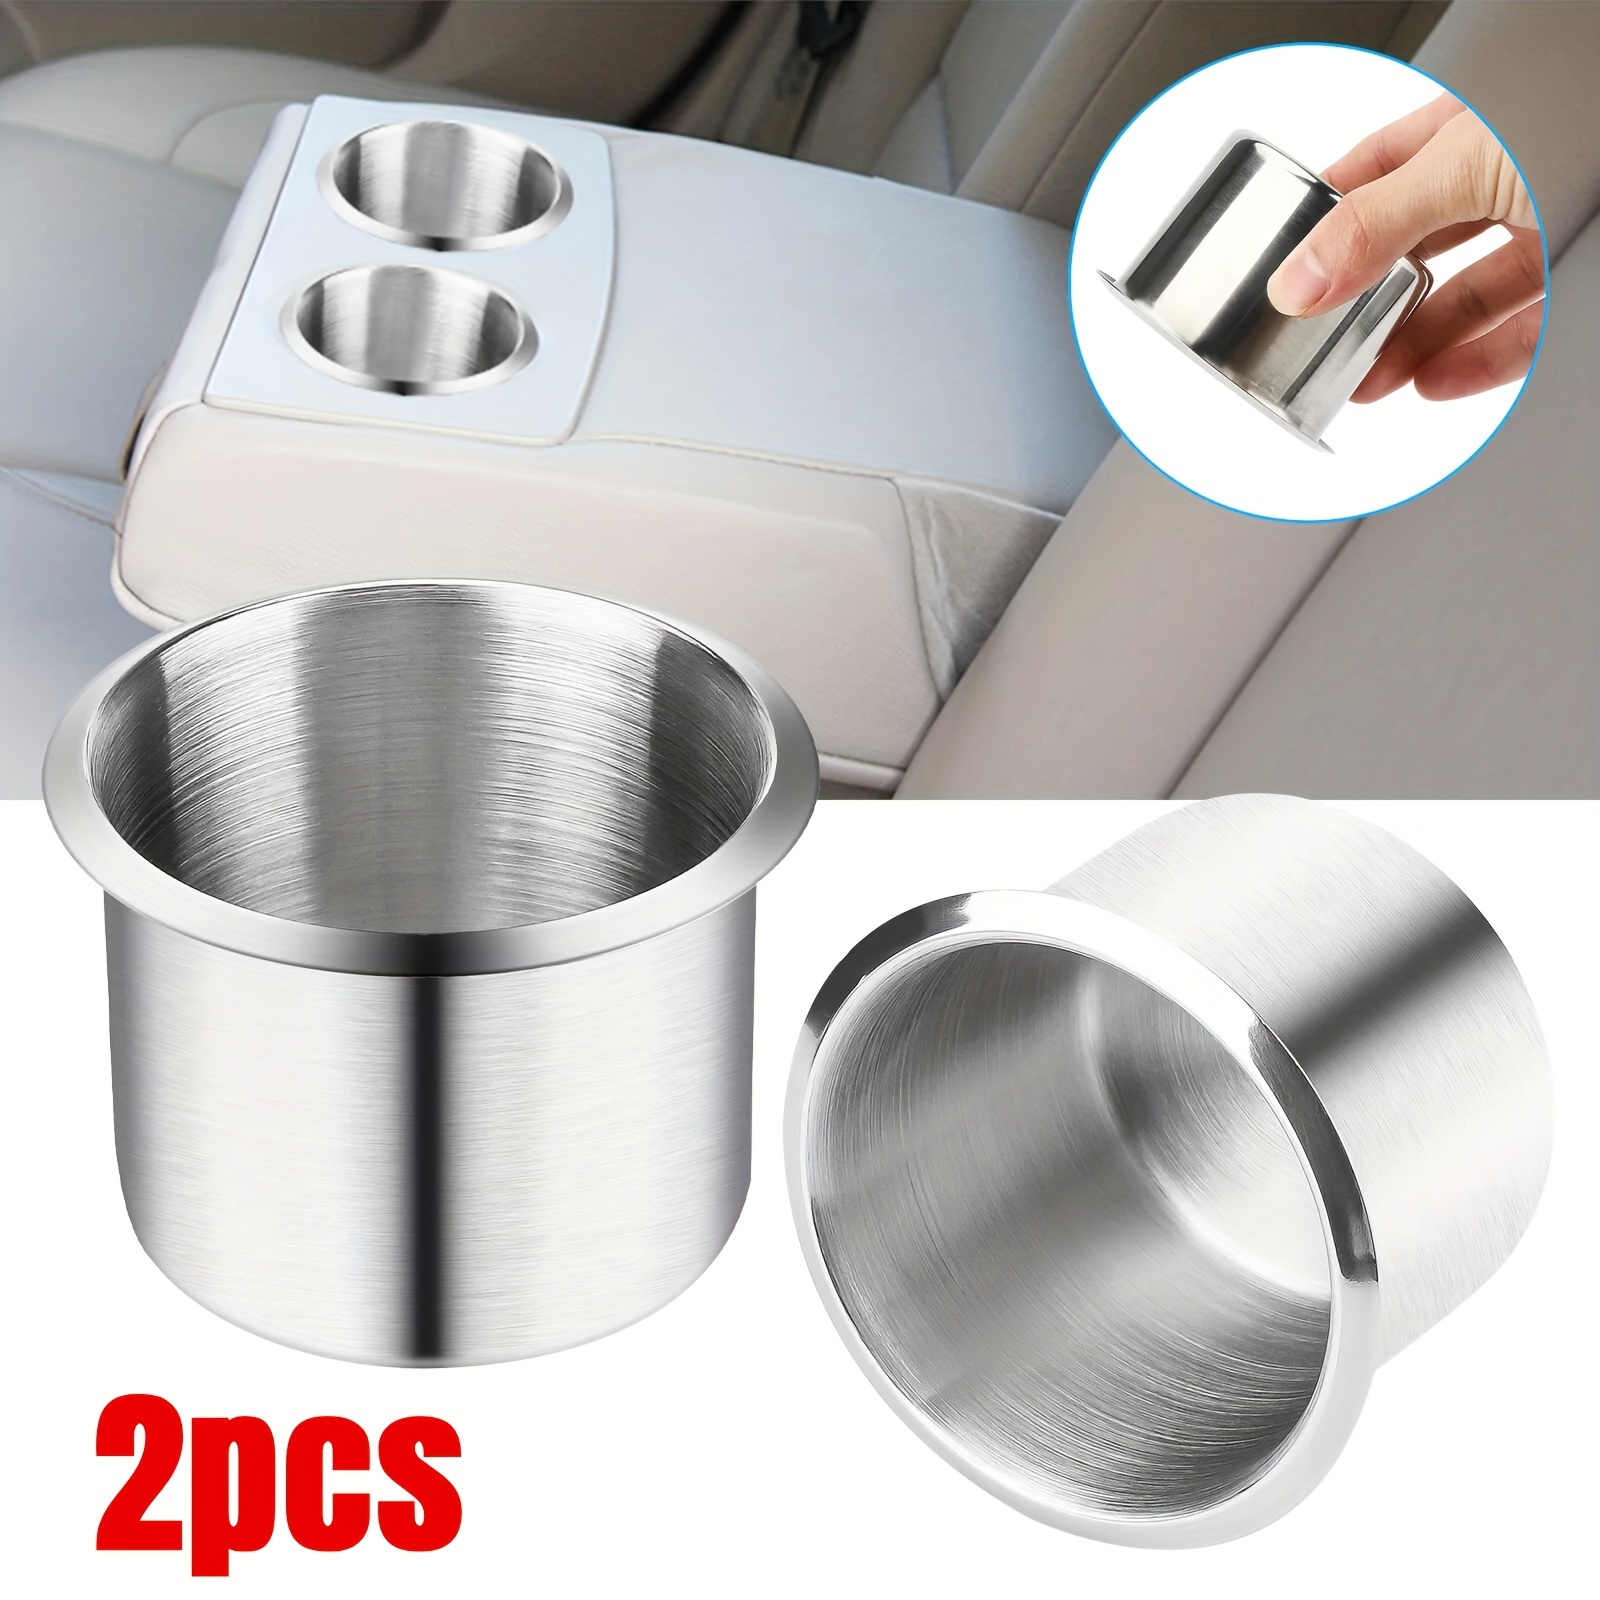 

2pcs Universal Stainless Steel Cup Drink Holder Silver For Car Center Console Marine Boat Rv Camper Car Inserts Couch